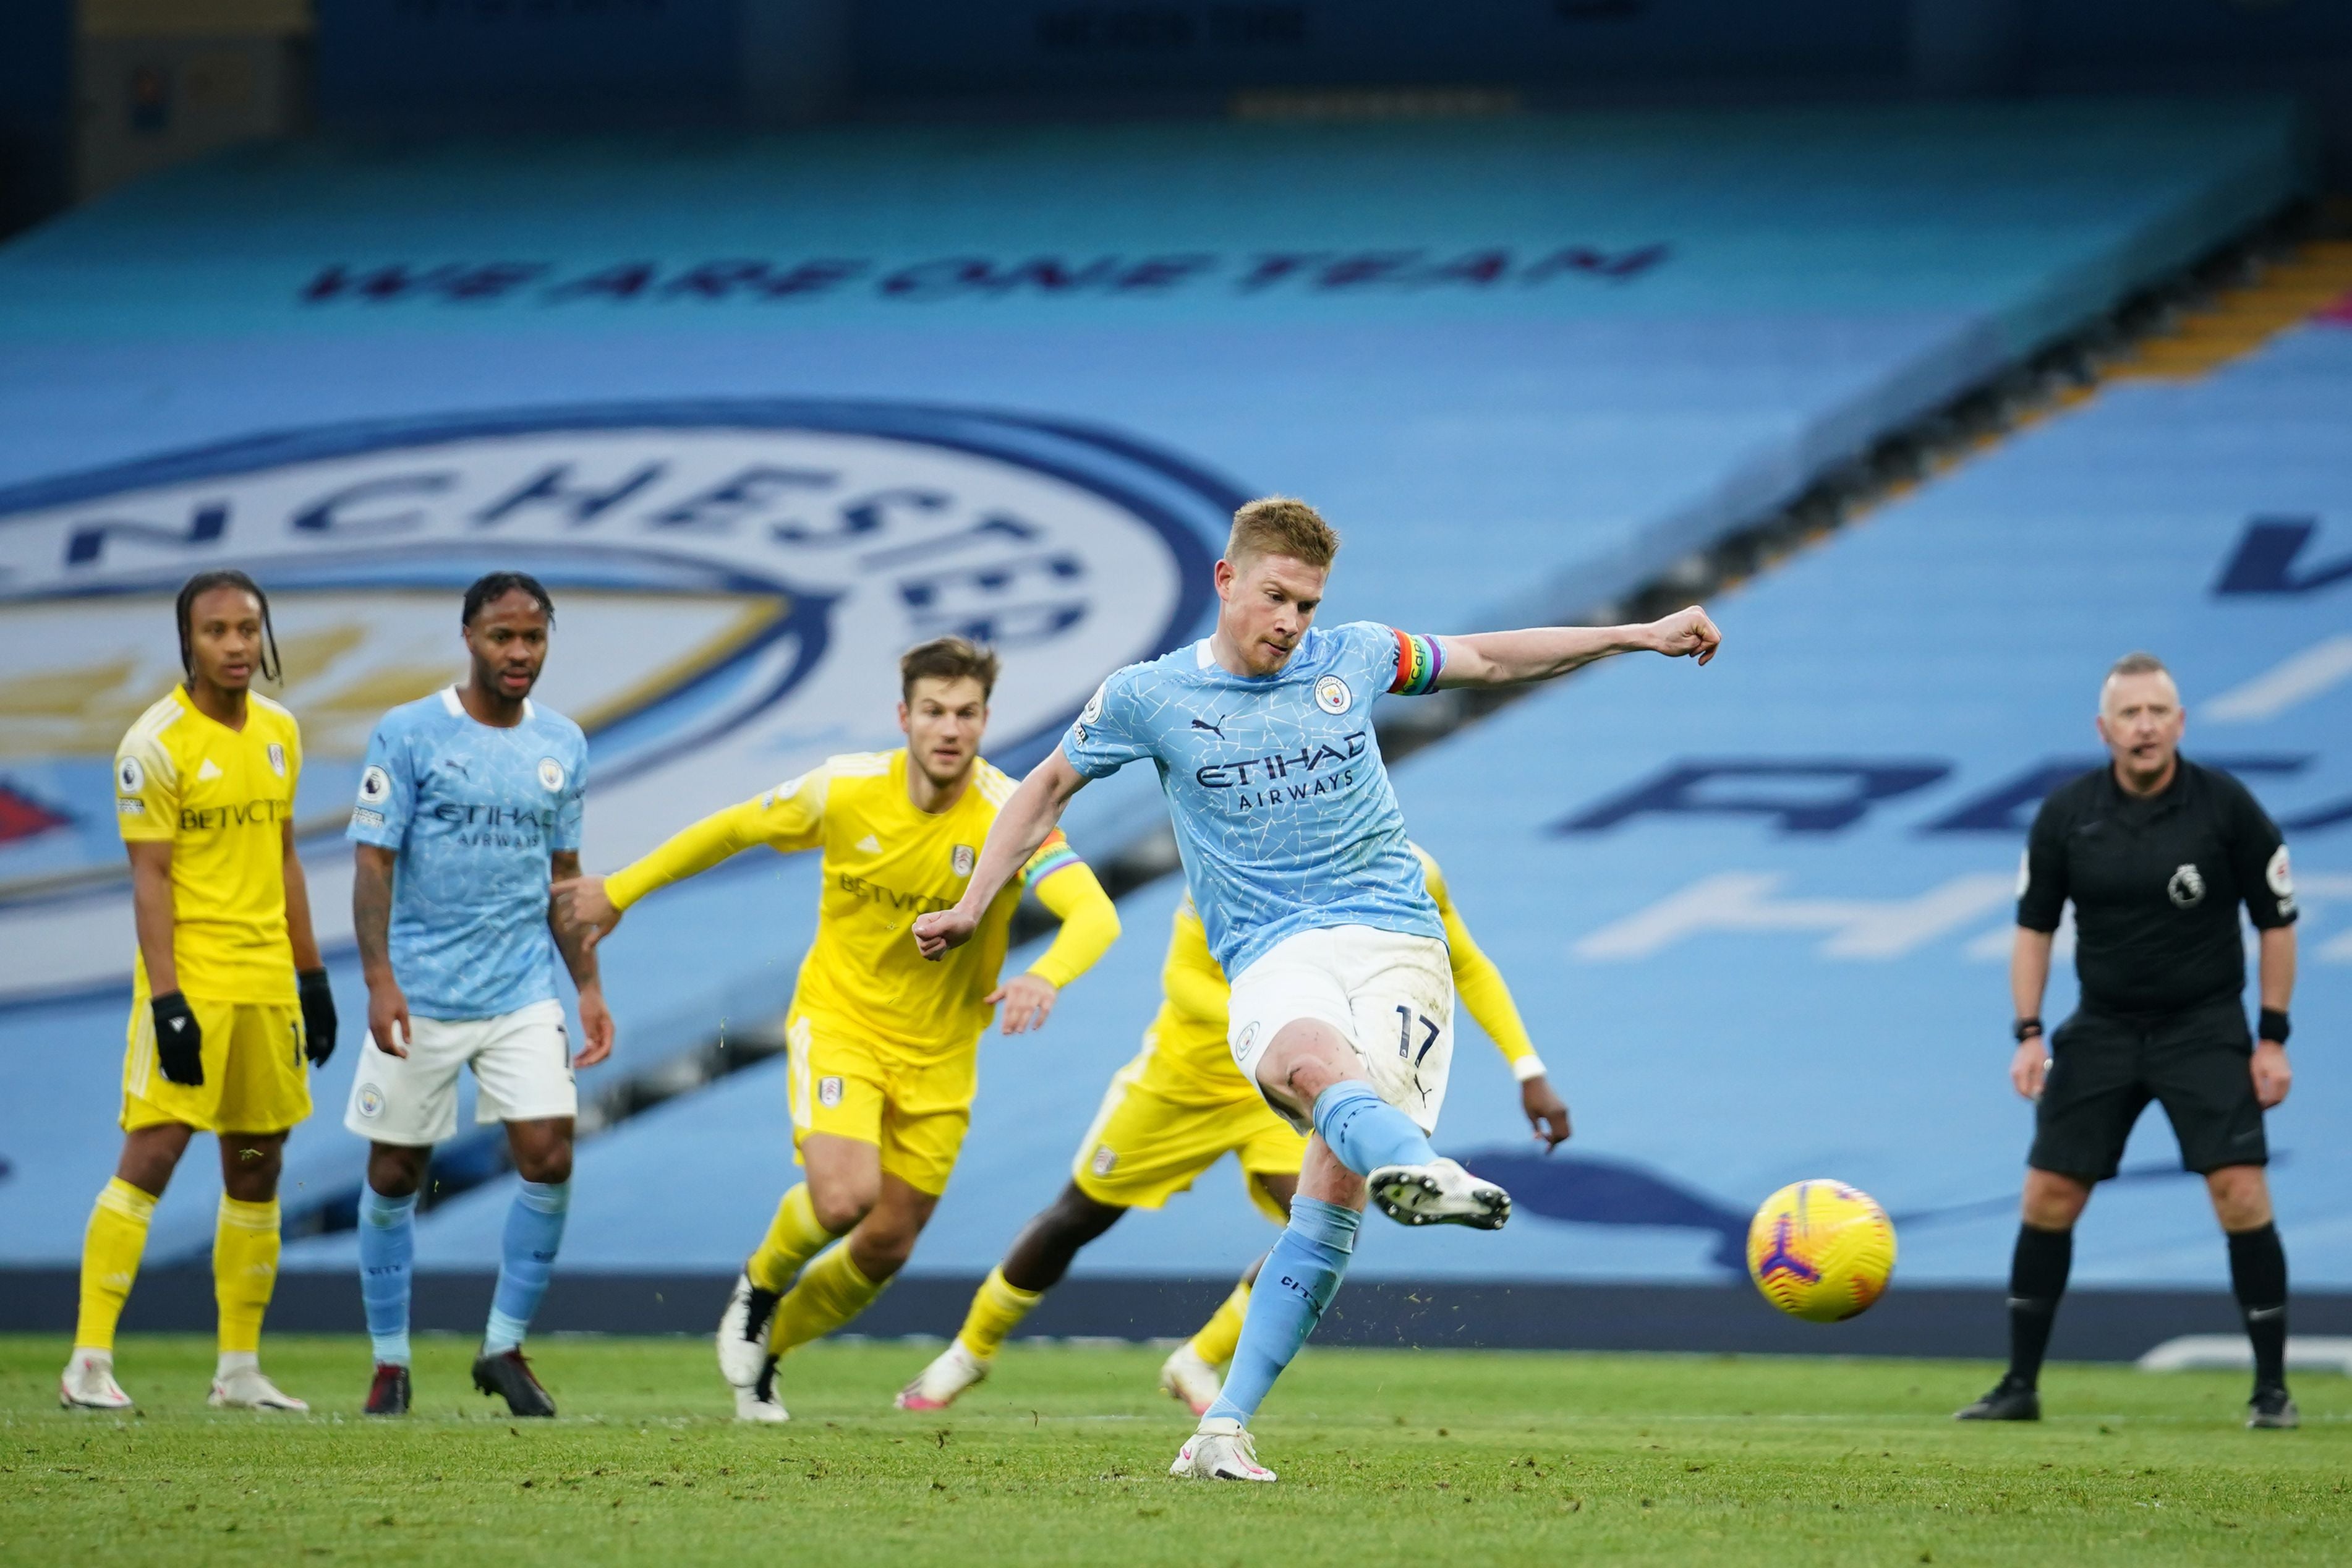 Kevin De Bruyne converts from the penalty spot